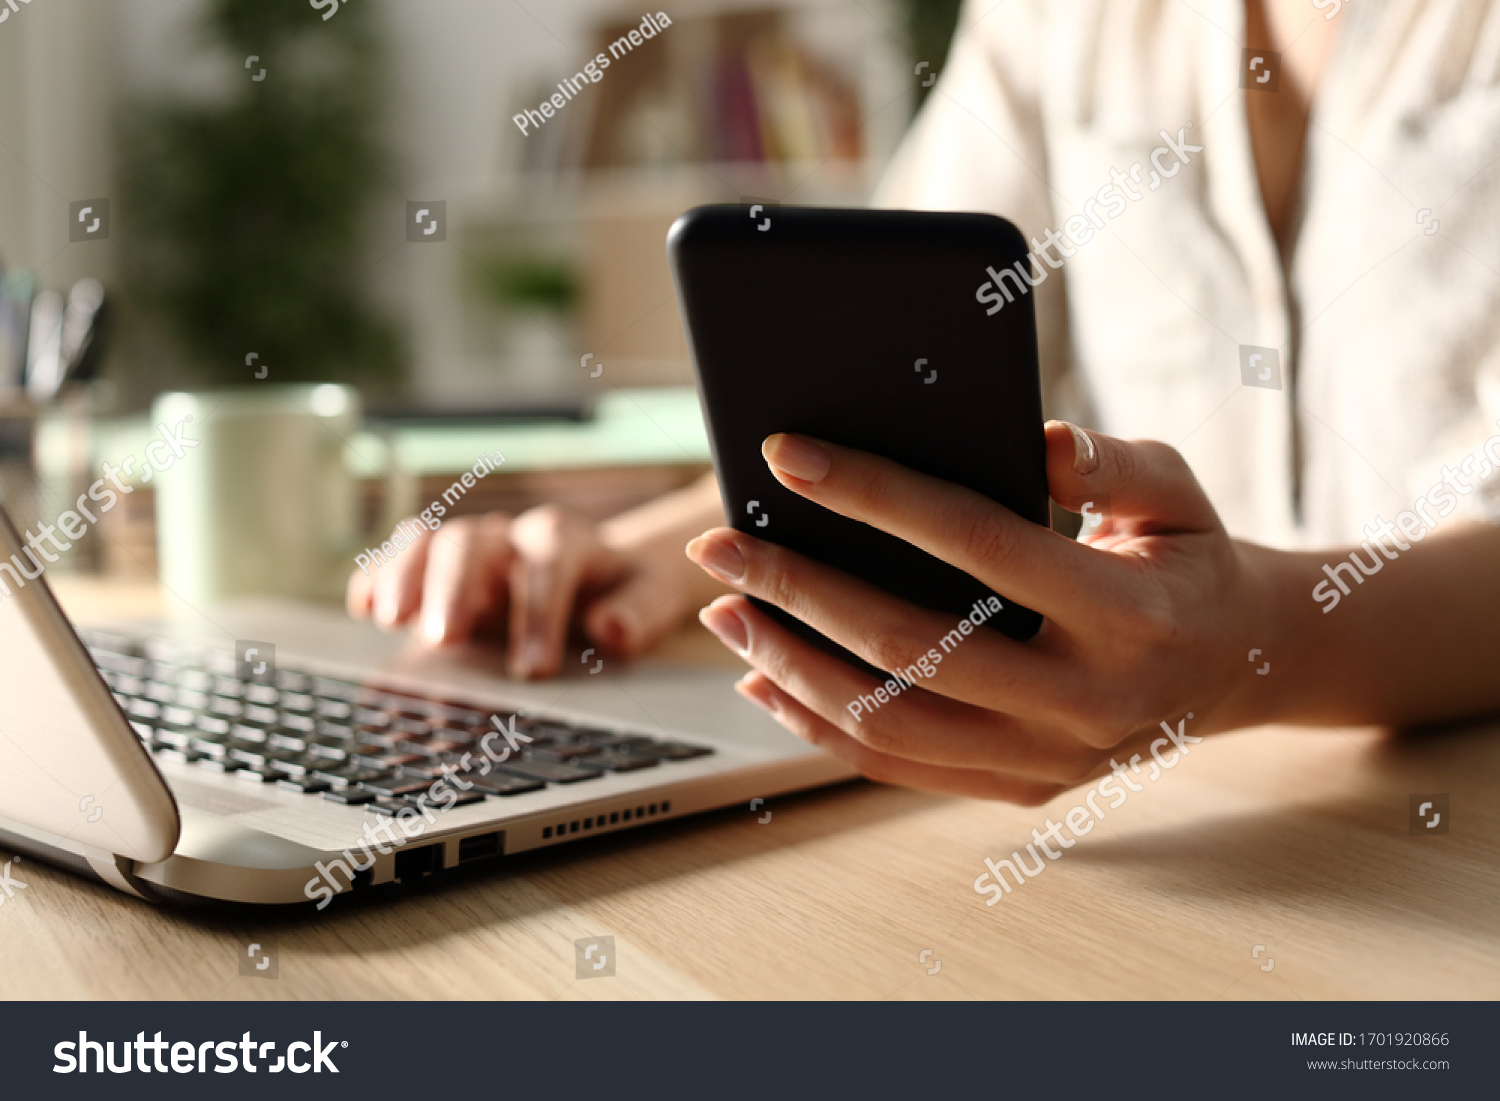 Close up of woman hands using laptop checking smart phone at night at home #1701920866